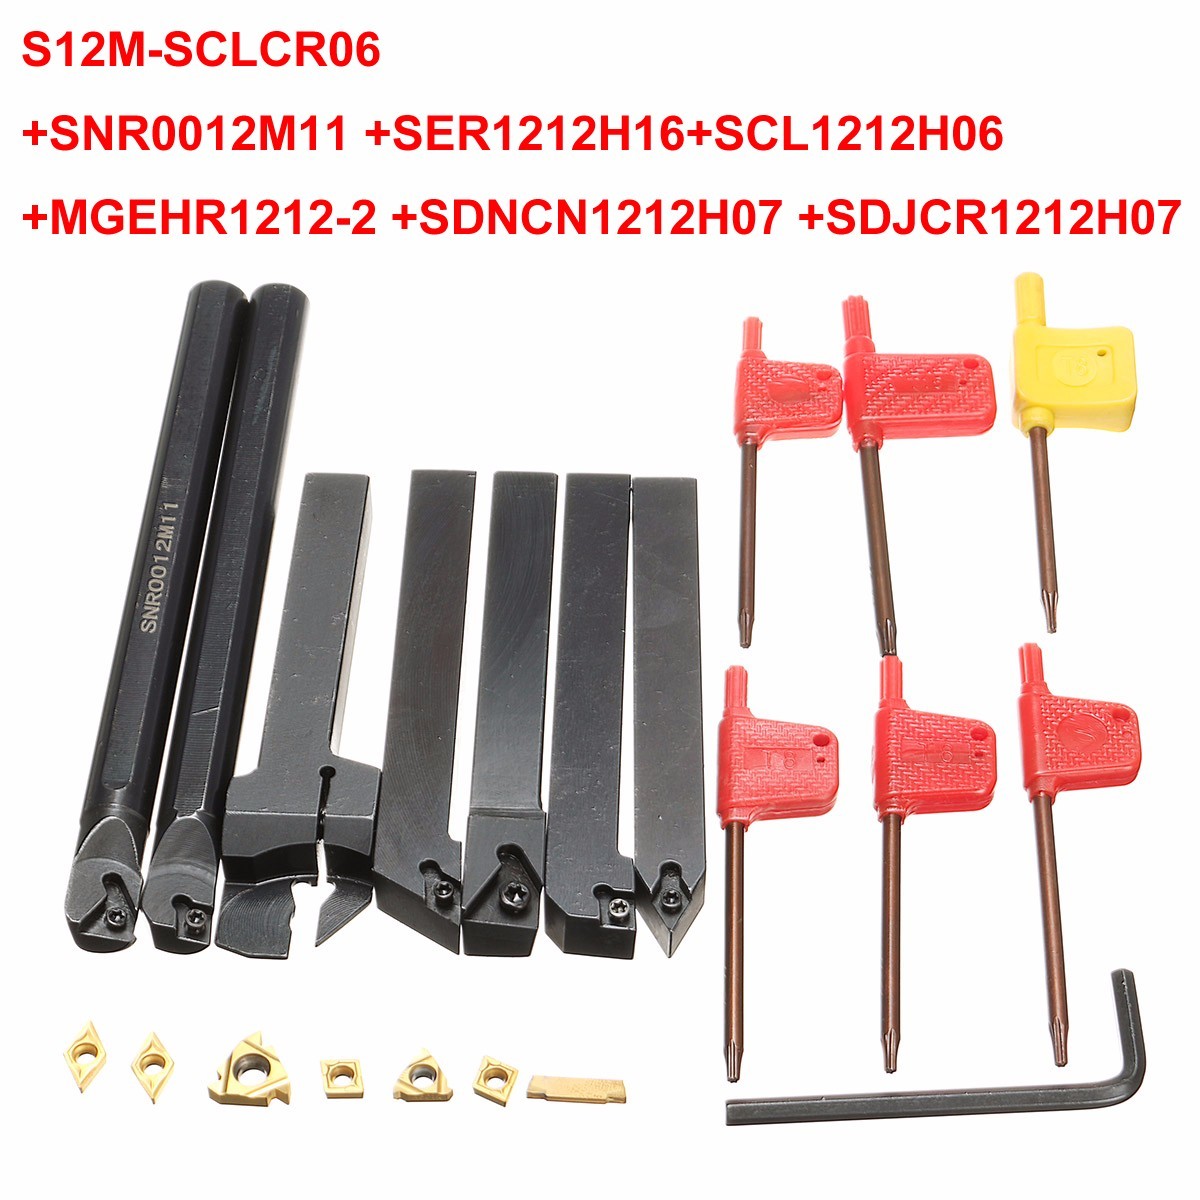 Drillpro 7pcs 12mm Shank Lathe Set Boring Bar Turning Tool Holder with Carbide Inserts CCMT060204 DCMT070204 1